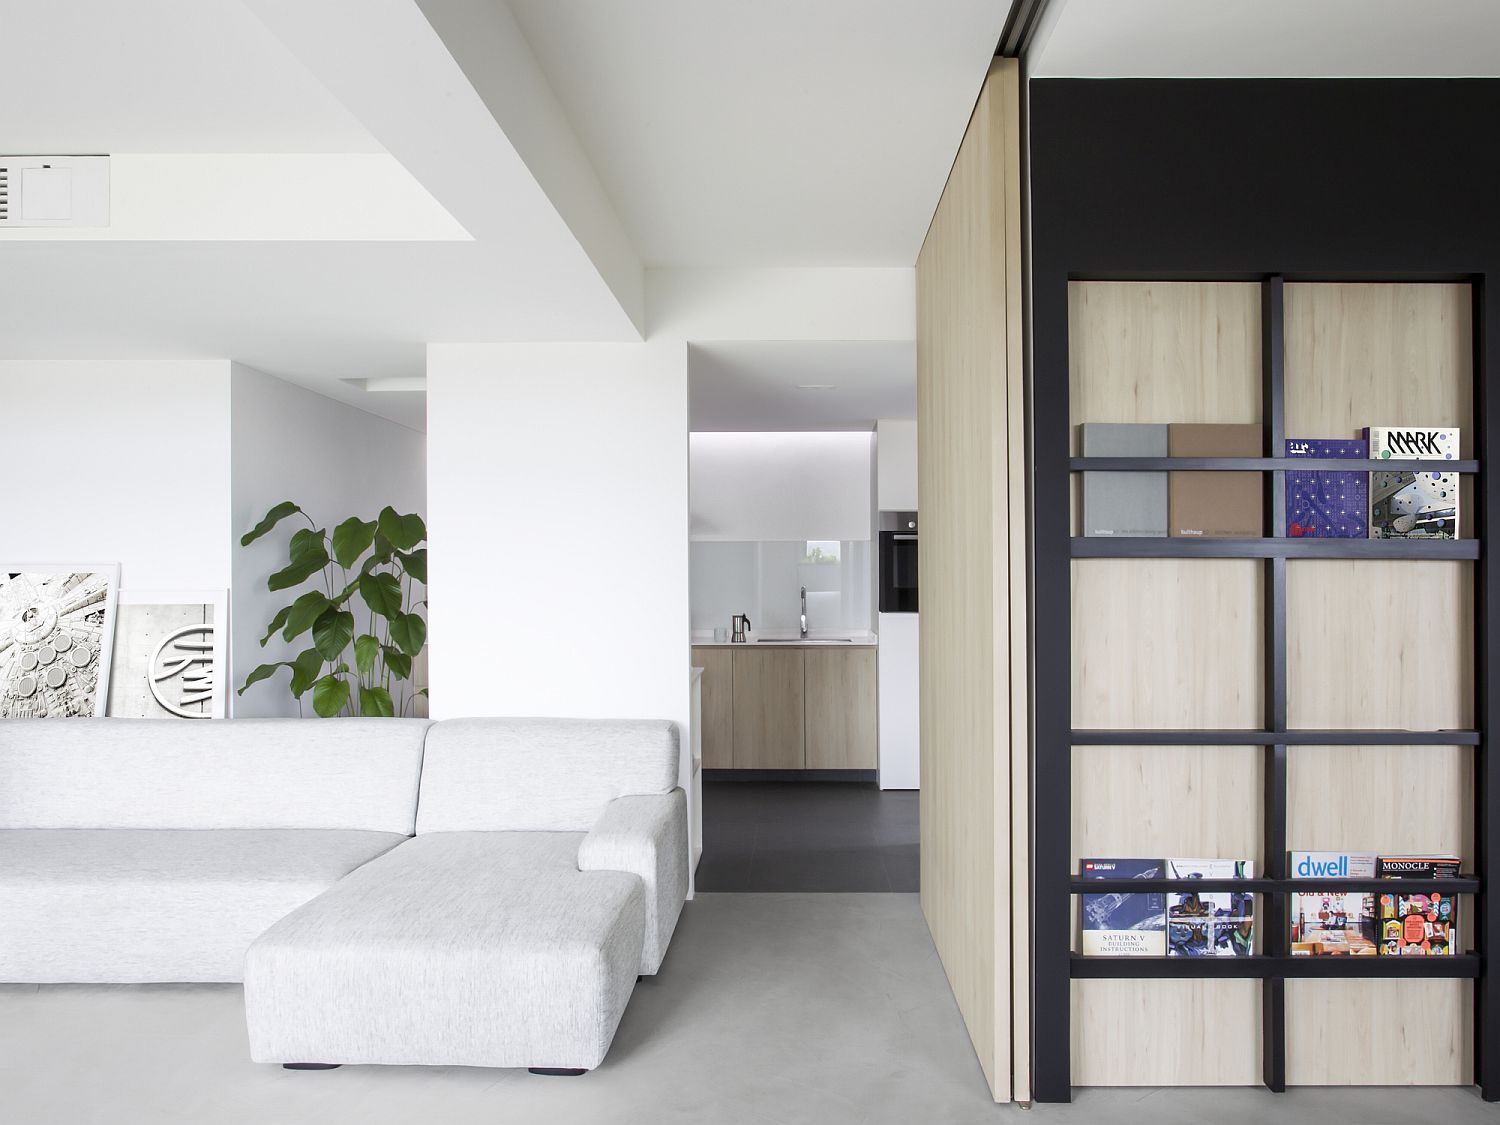 Smart wooden partitions create rooms within a larger room